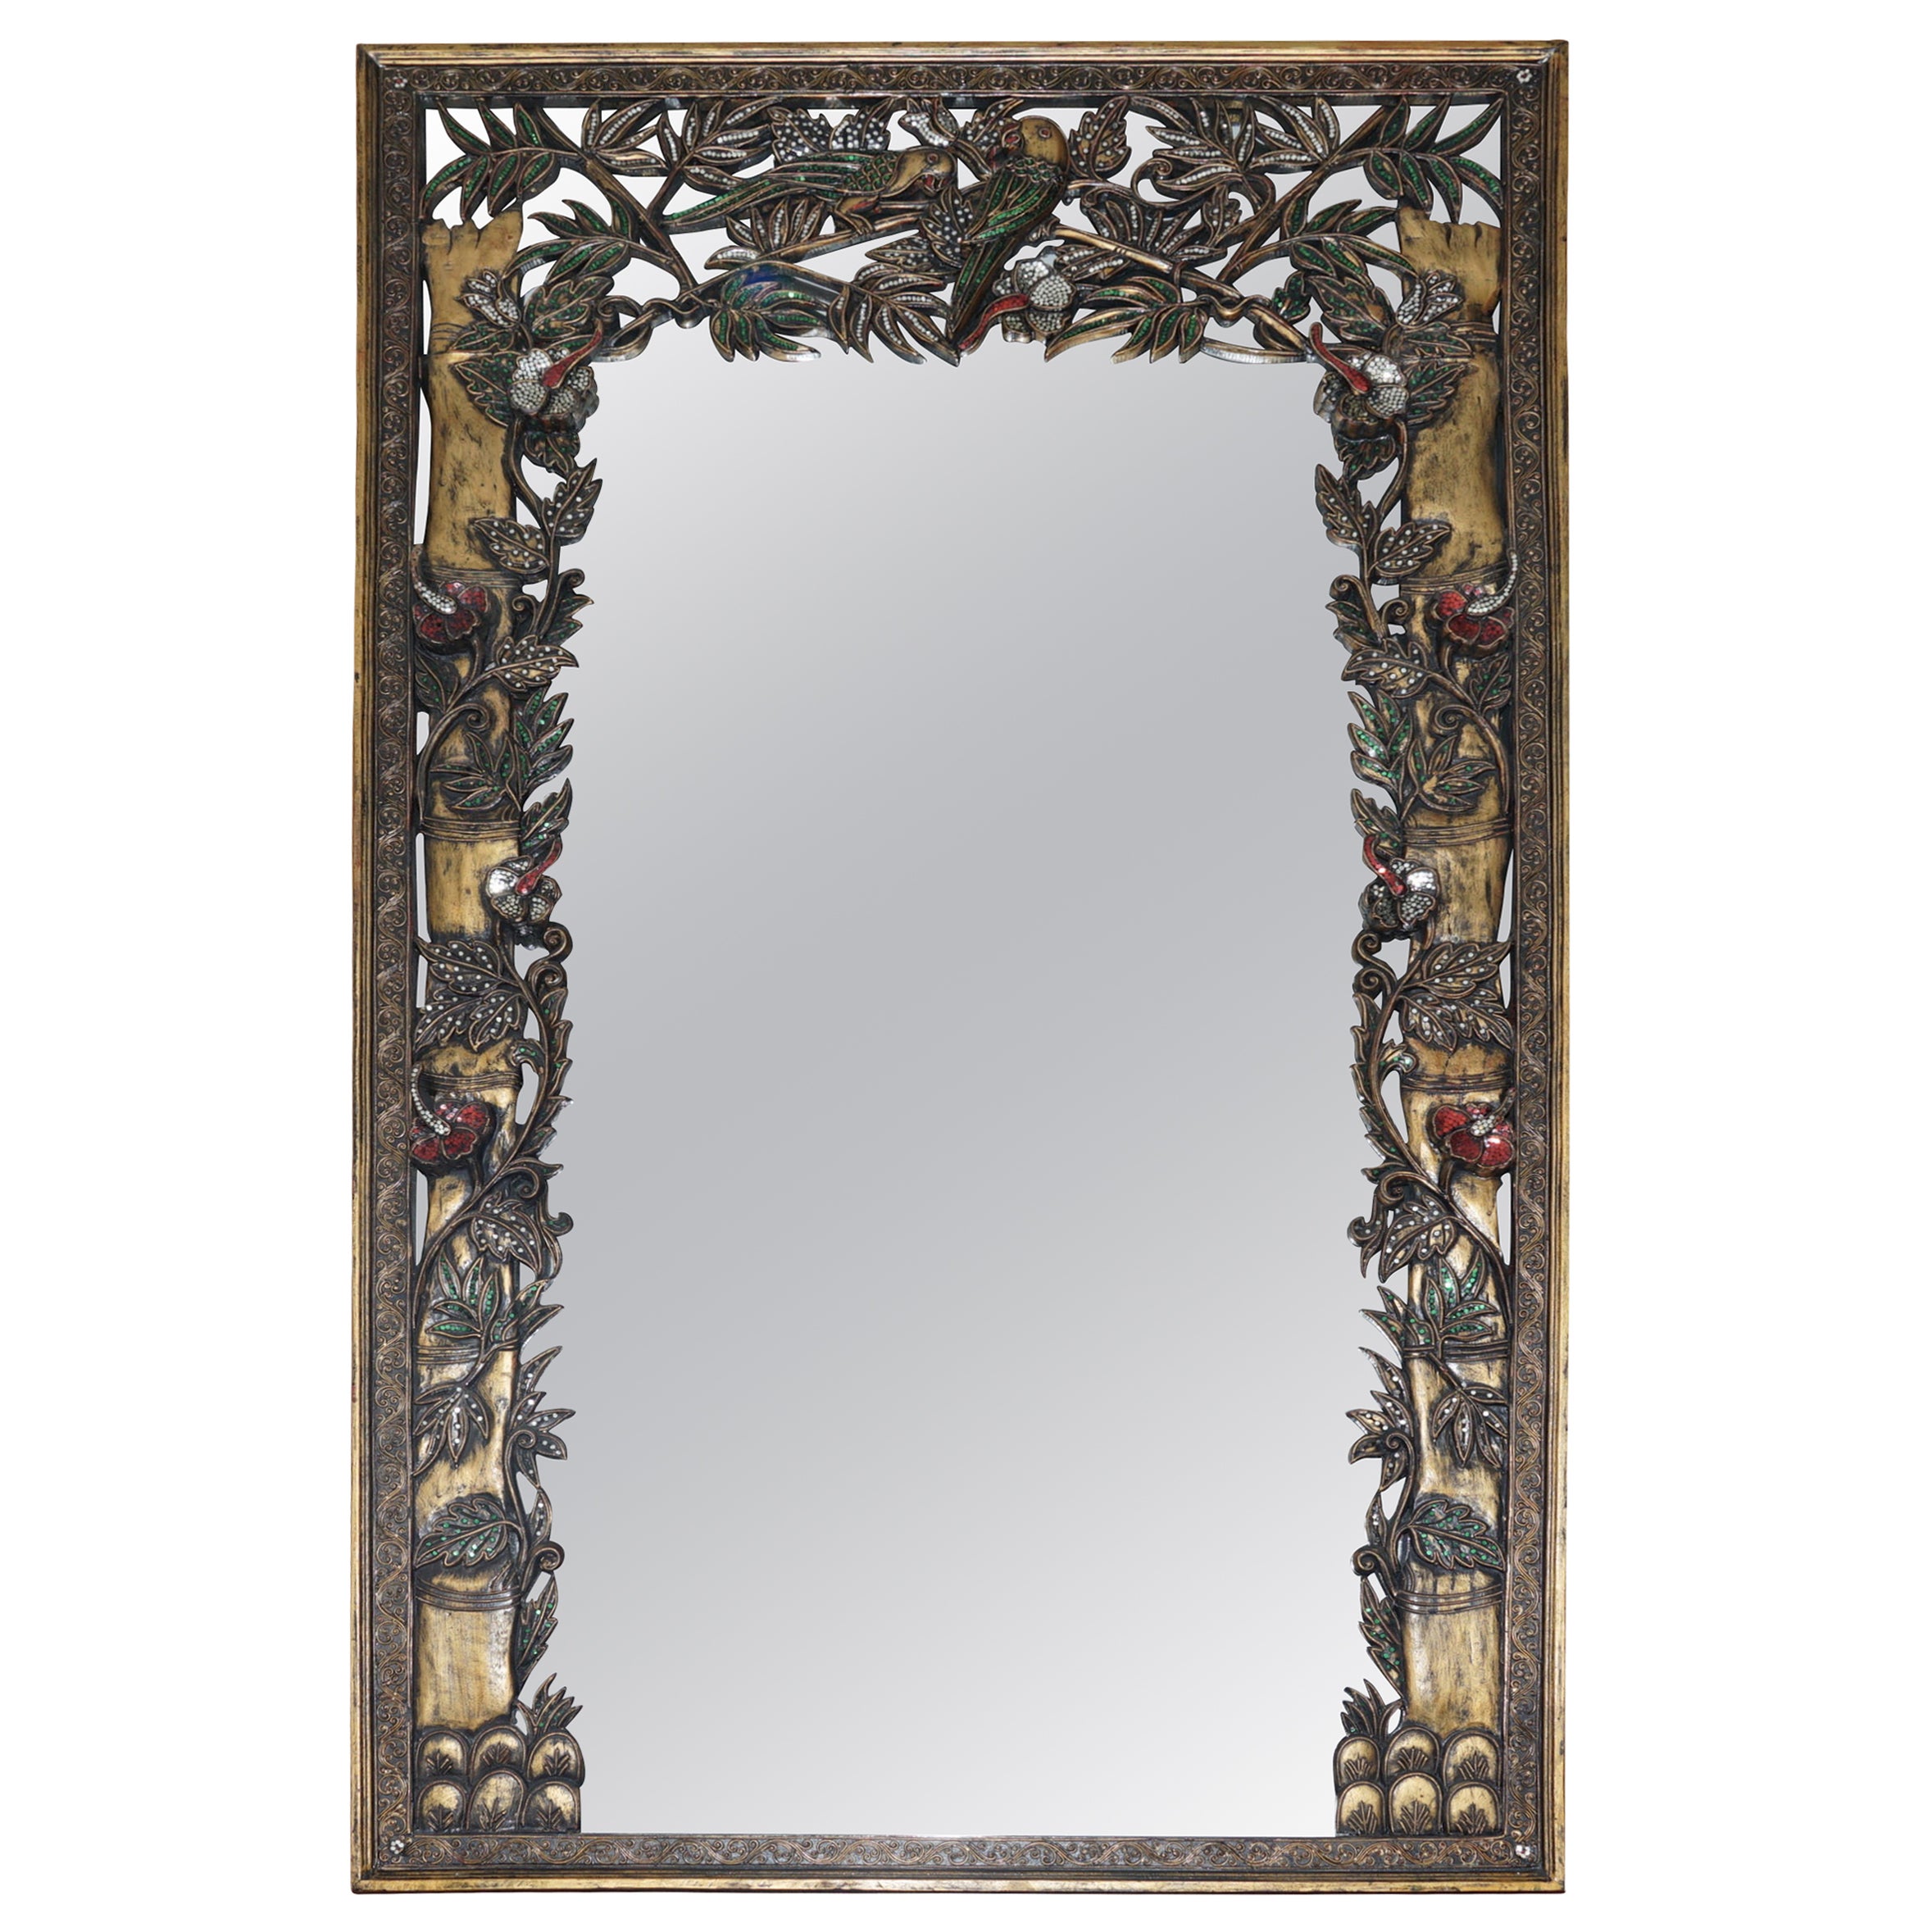 Extremely Decorative Full Length Birds of Paradise Mirror with Floral Details